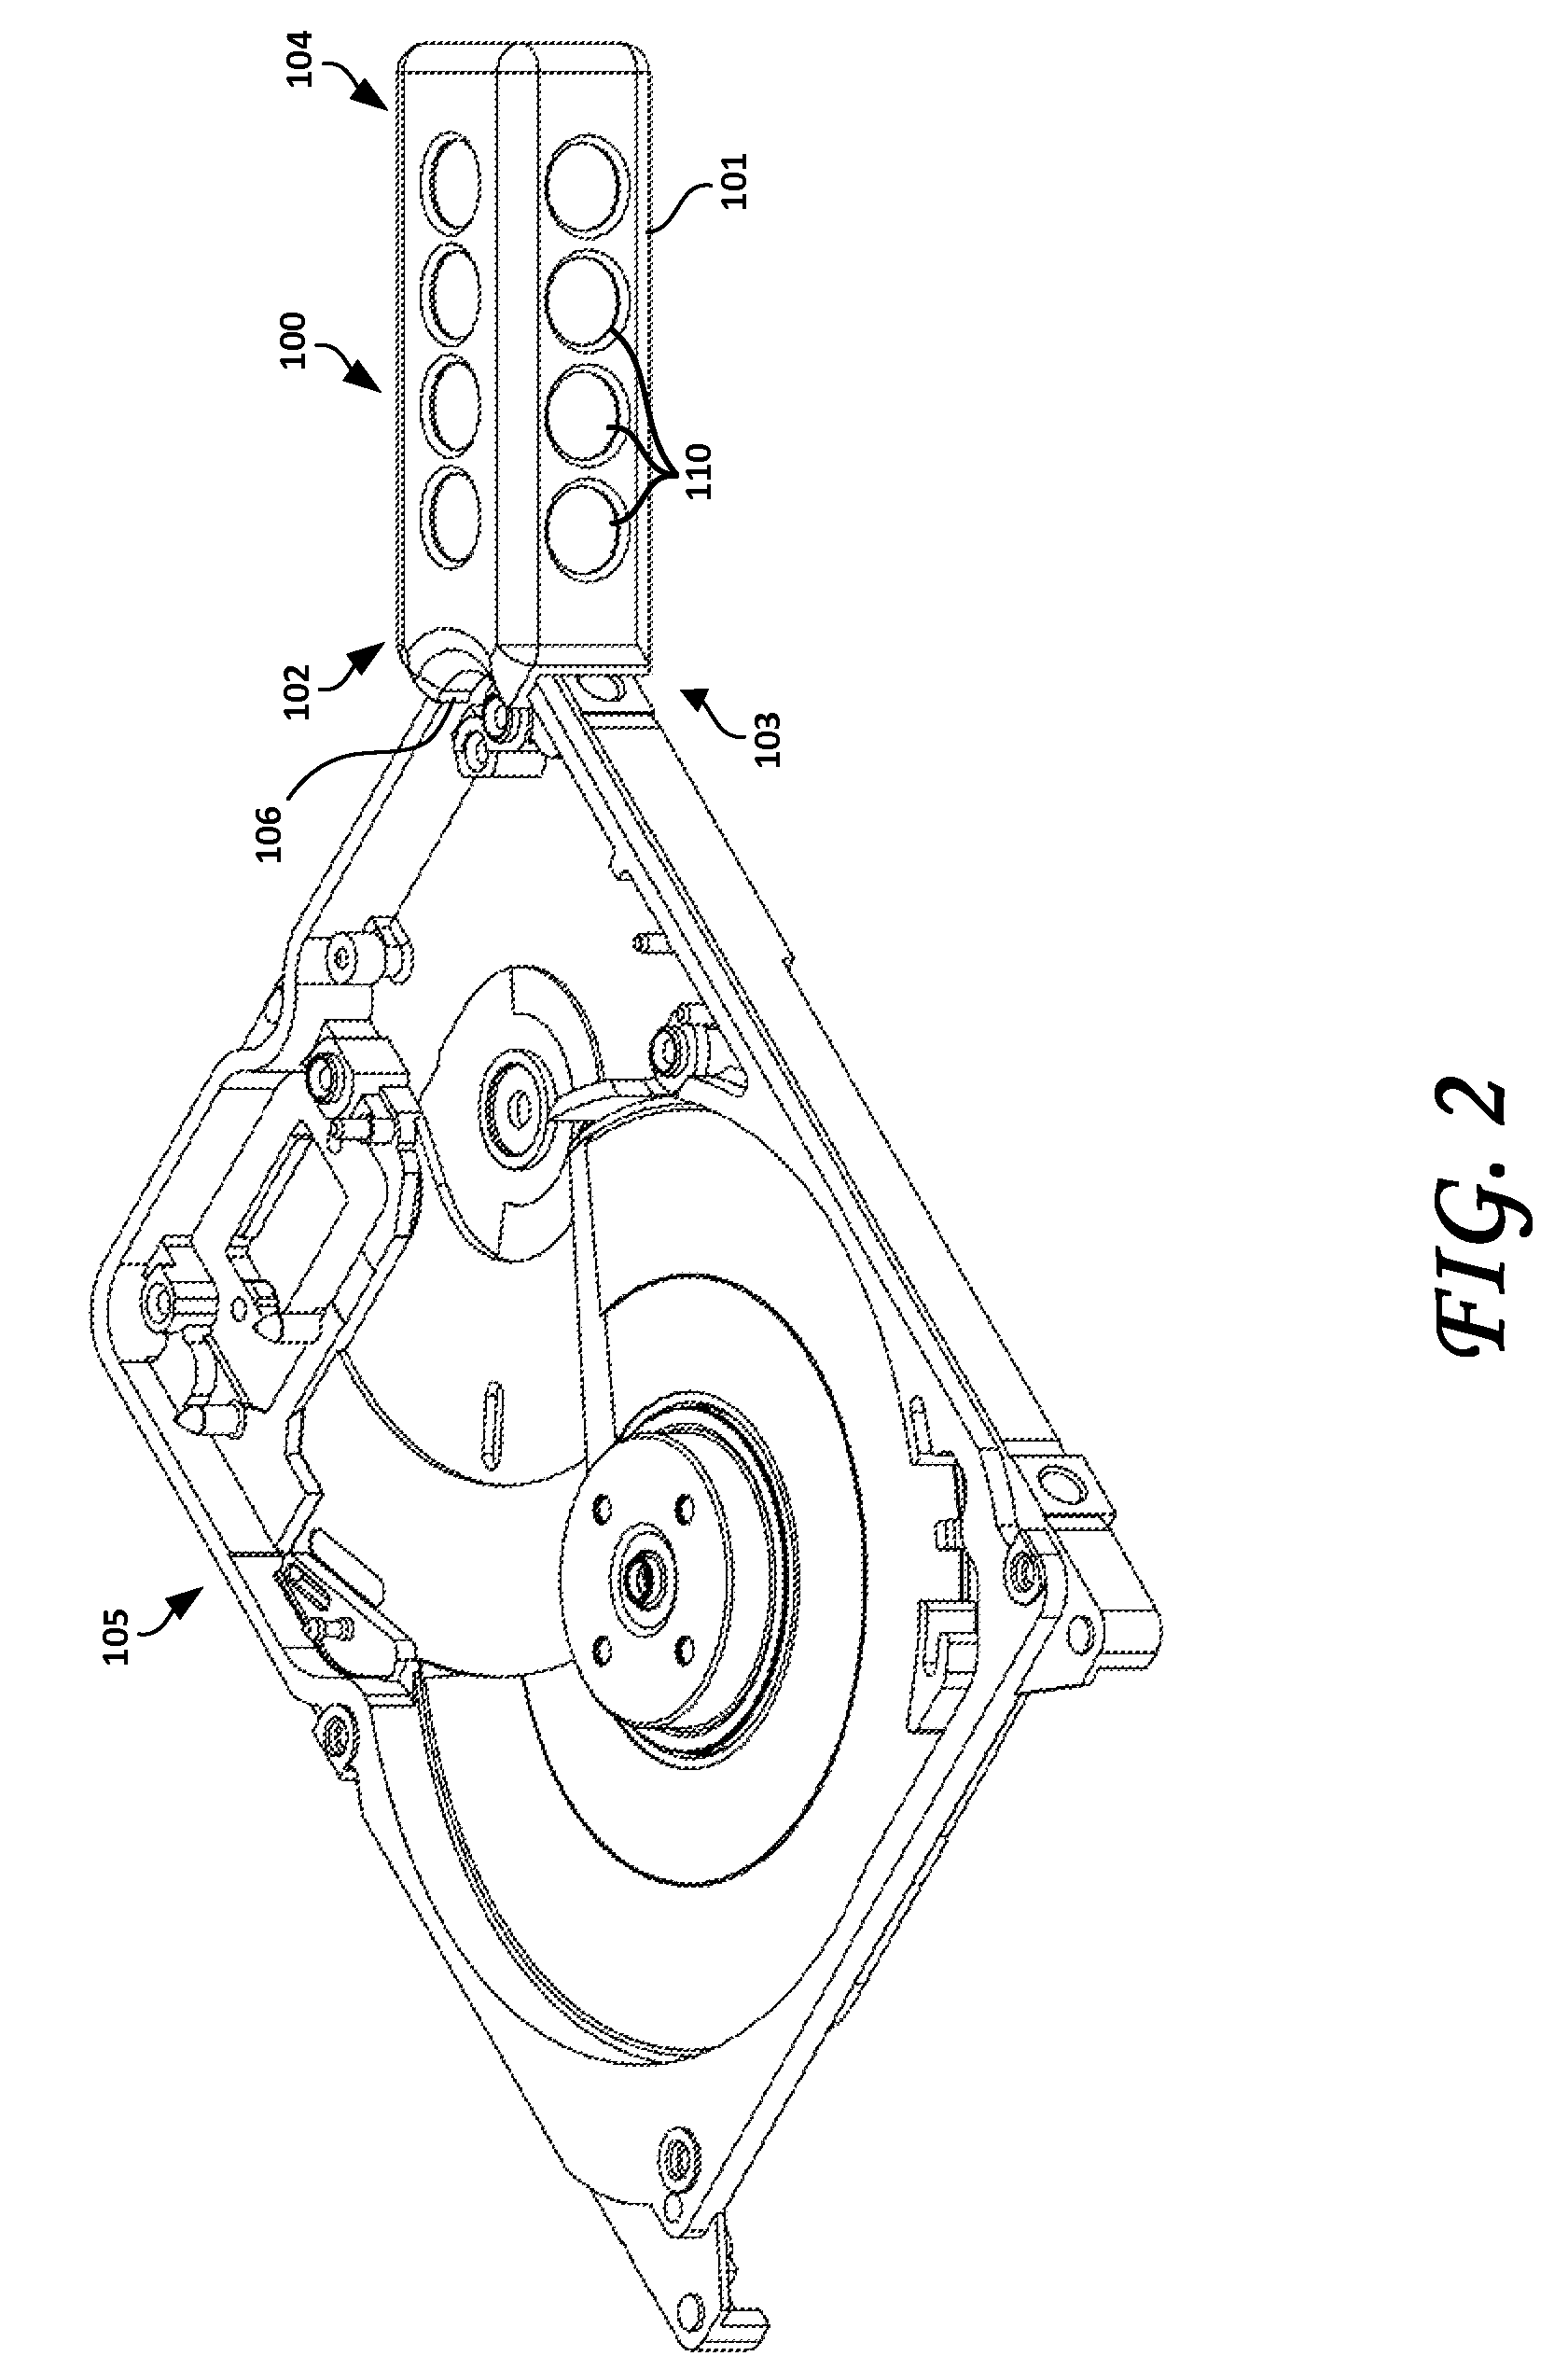 Methods and apparatus for minimizing contamination in hard disk drive assembly processes